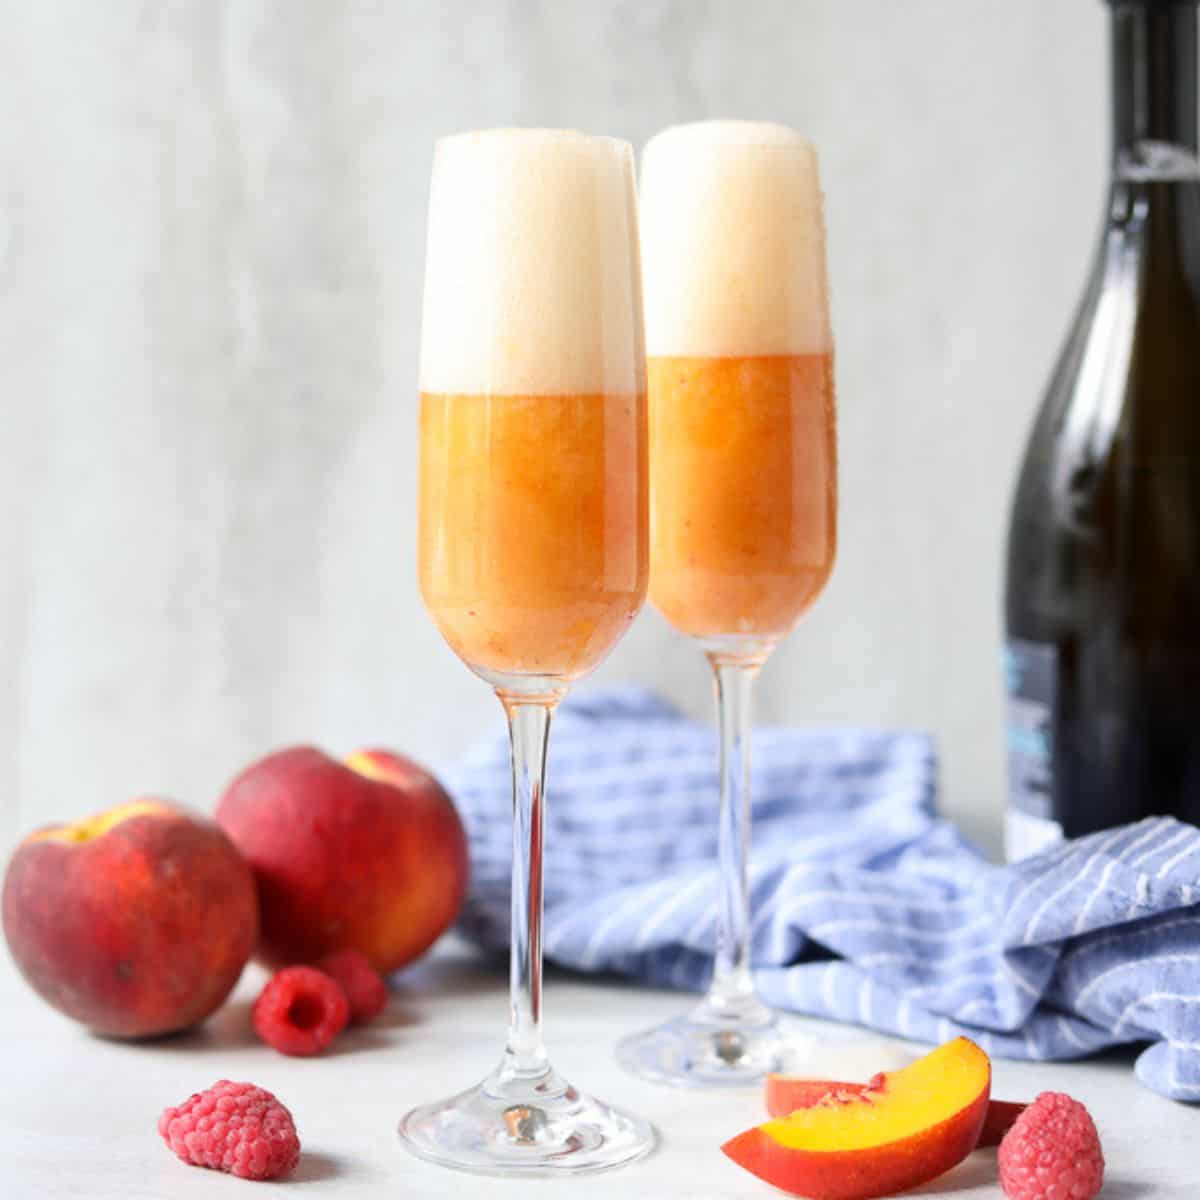 Two glasses of peach bellini cocktails next to fresh peaches and prosecco.